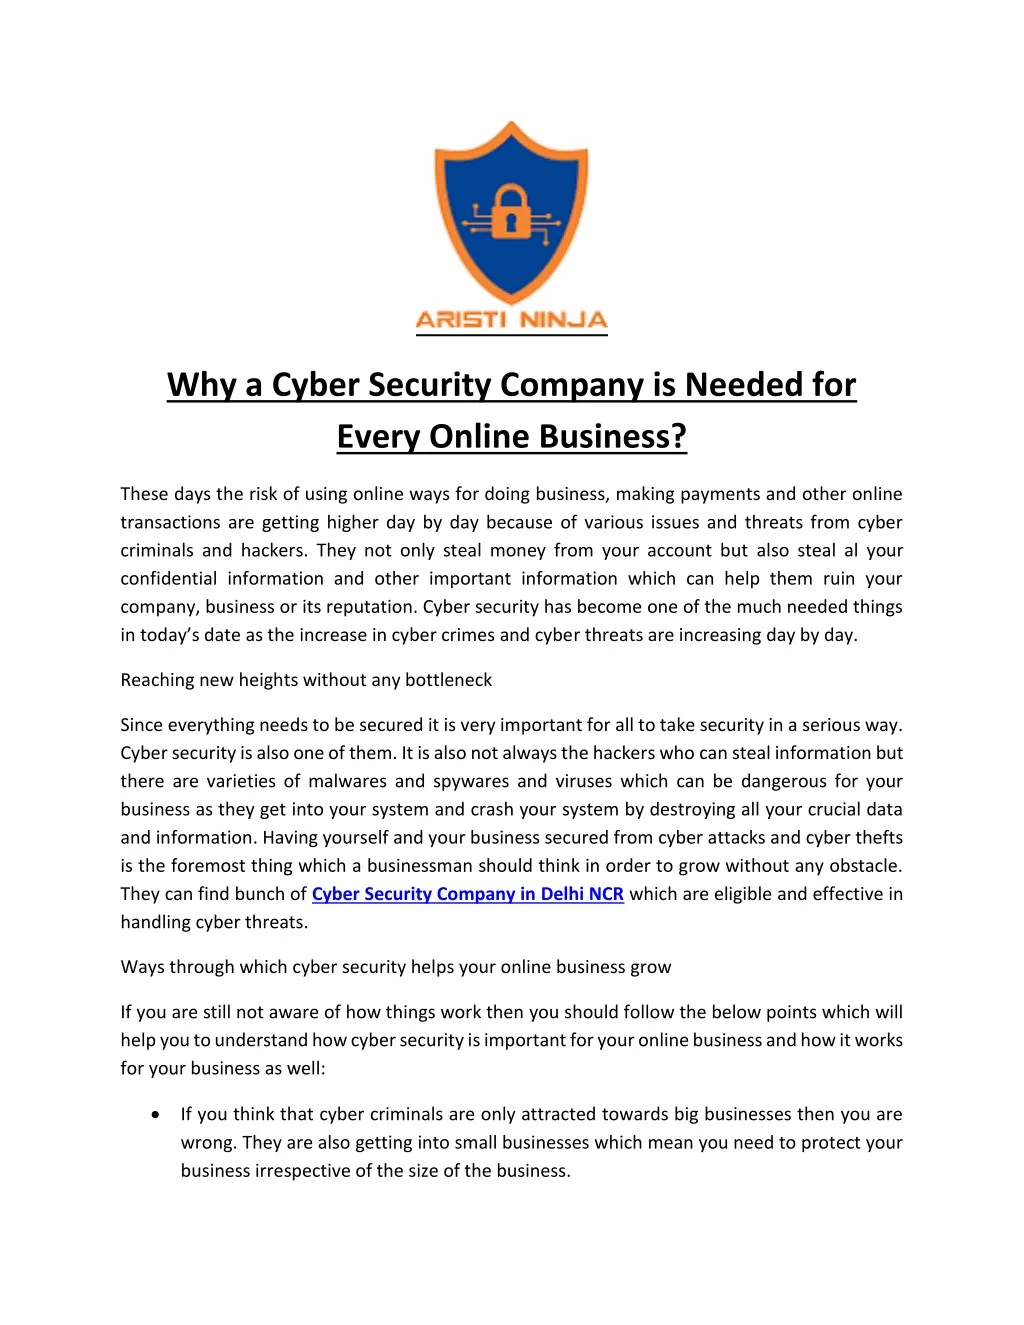 why a cyber security company is needed for every